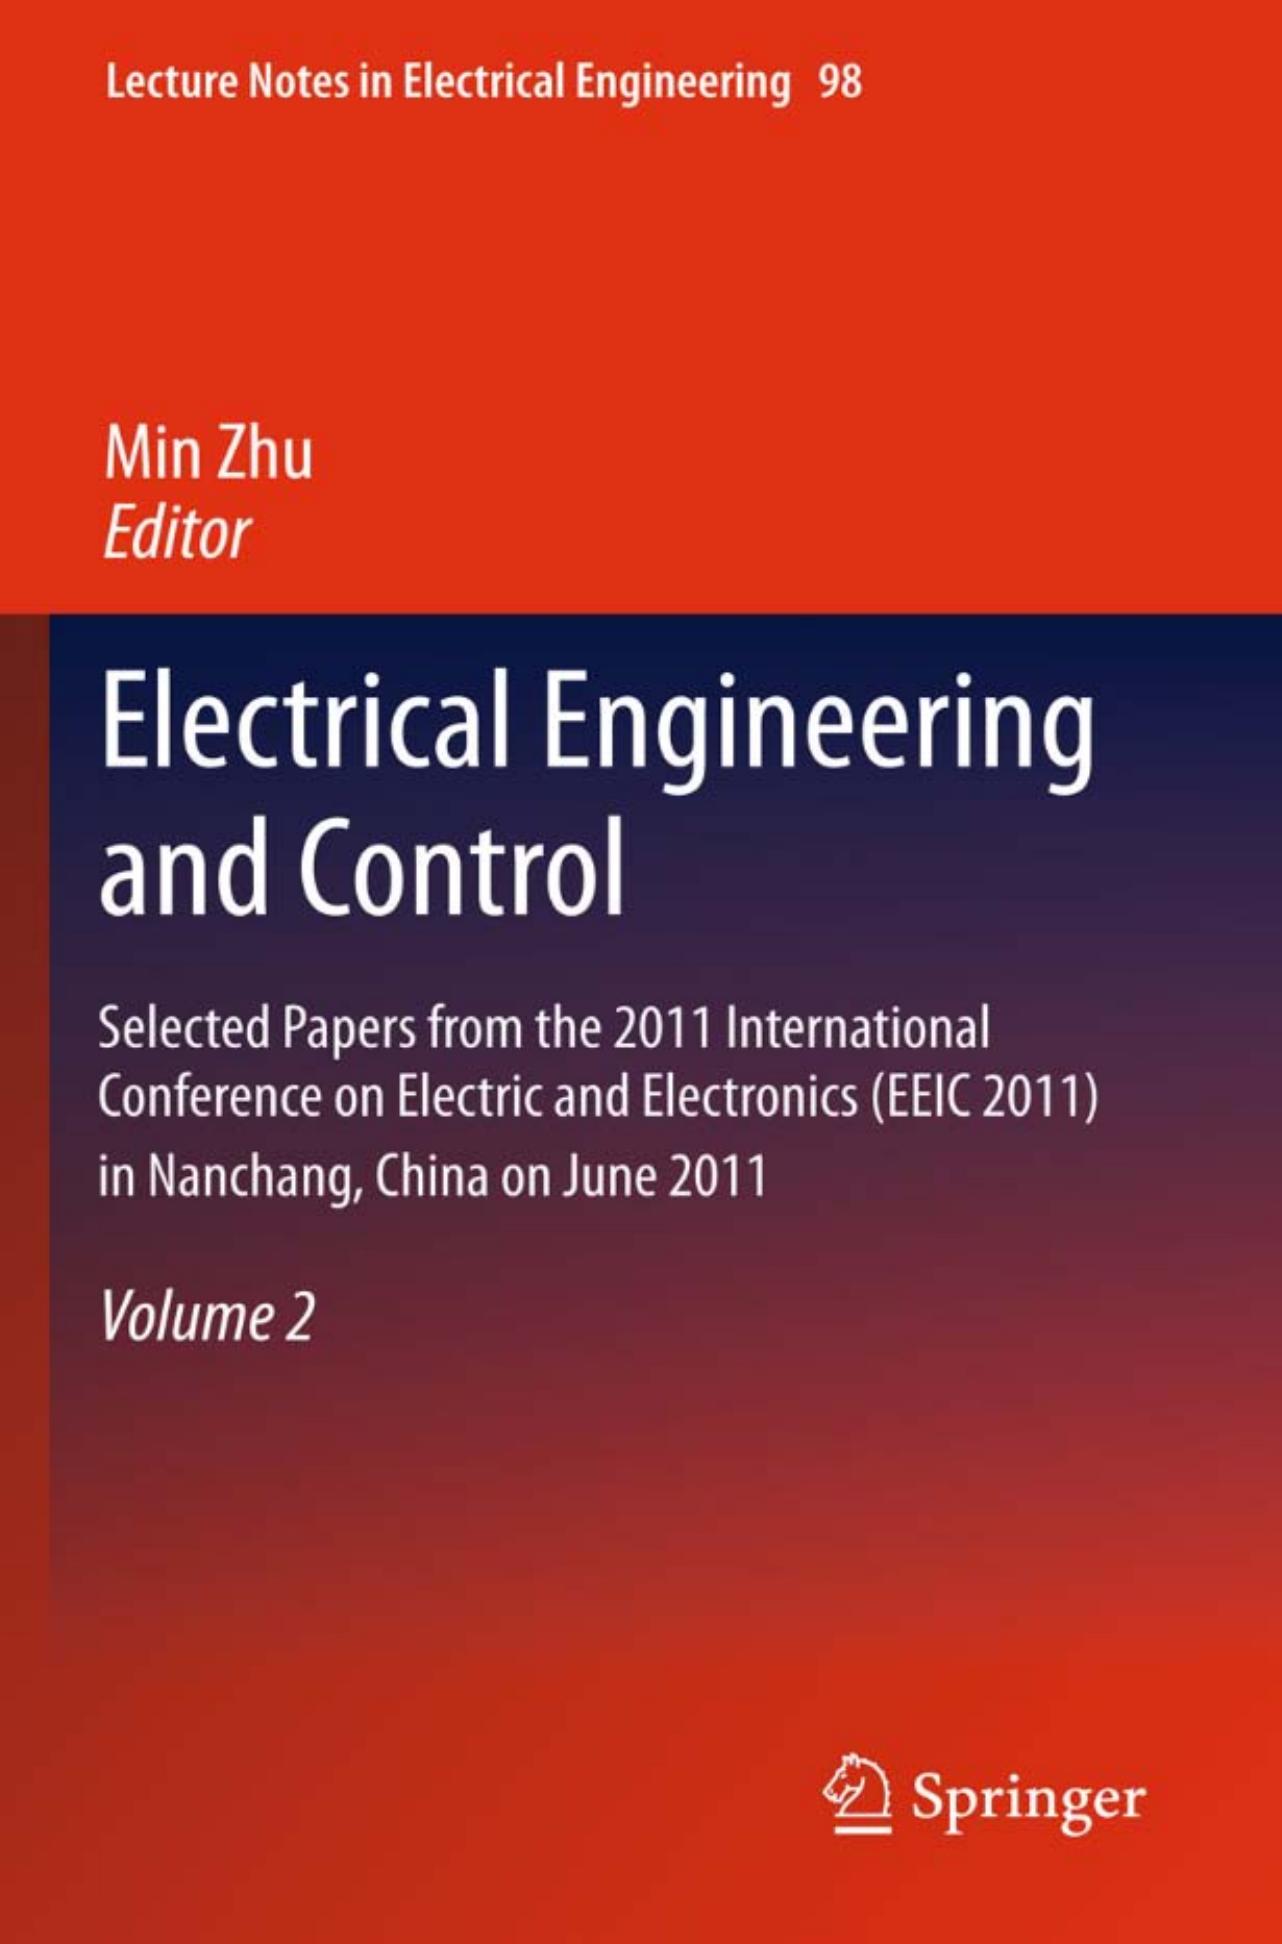 Electrical Engineering and Control, Volume 2 (Lecture Notes in Electrical Engineering, 98)